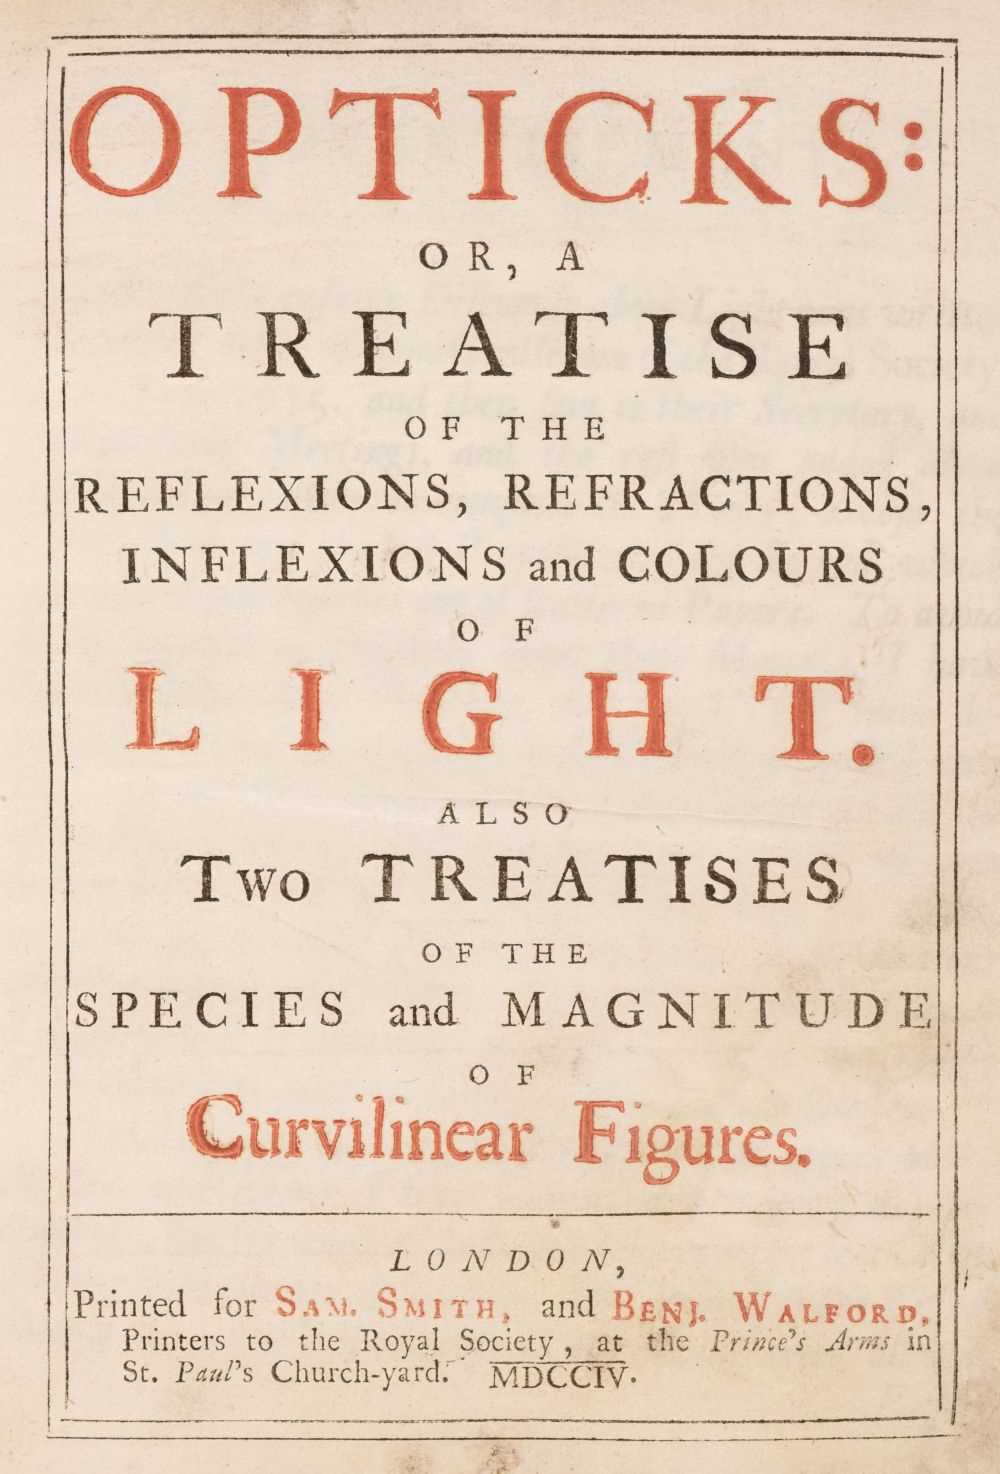 130 - Newton (Isaac). Opticks: Or, A Treatise of the Reflexions, Refractions, Inflexions, etc ..., 1704